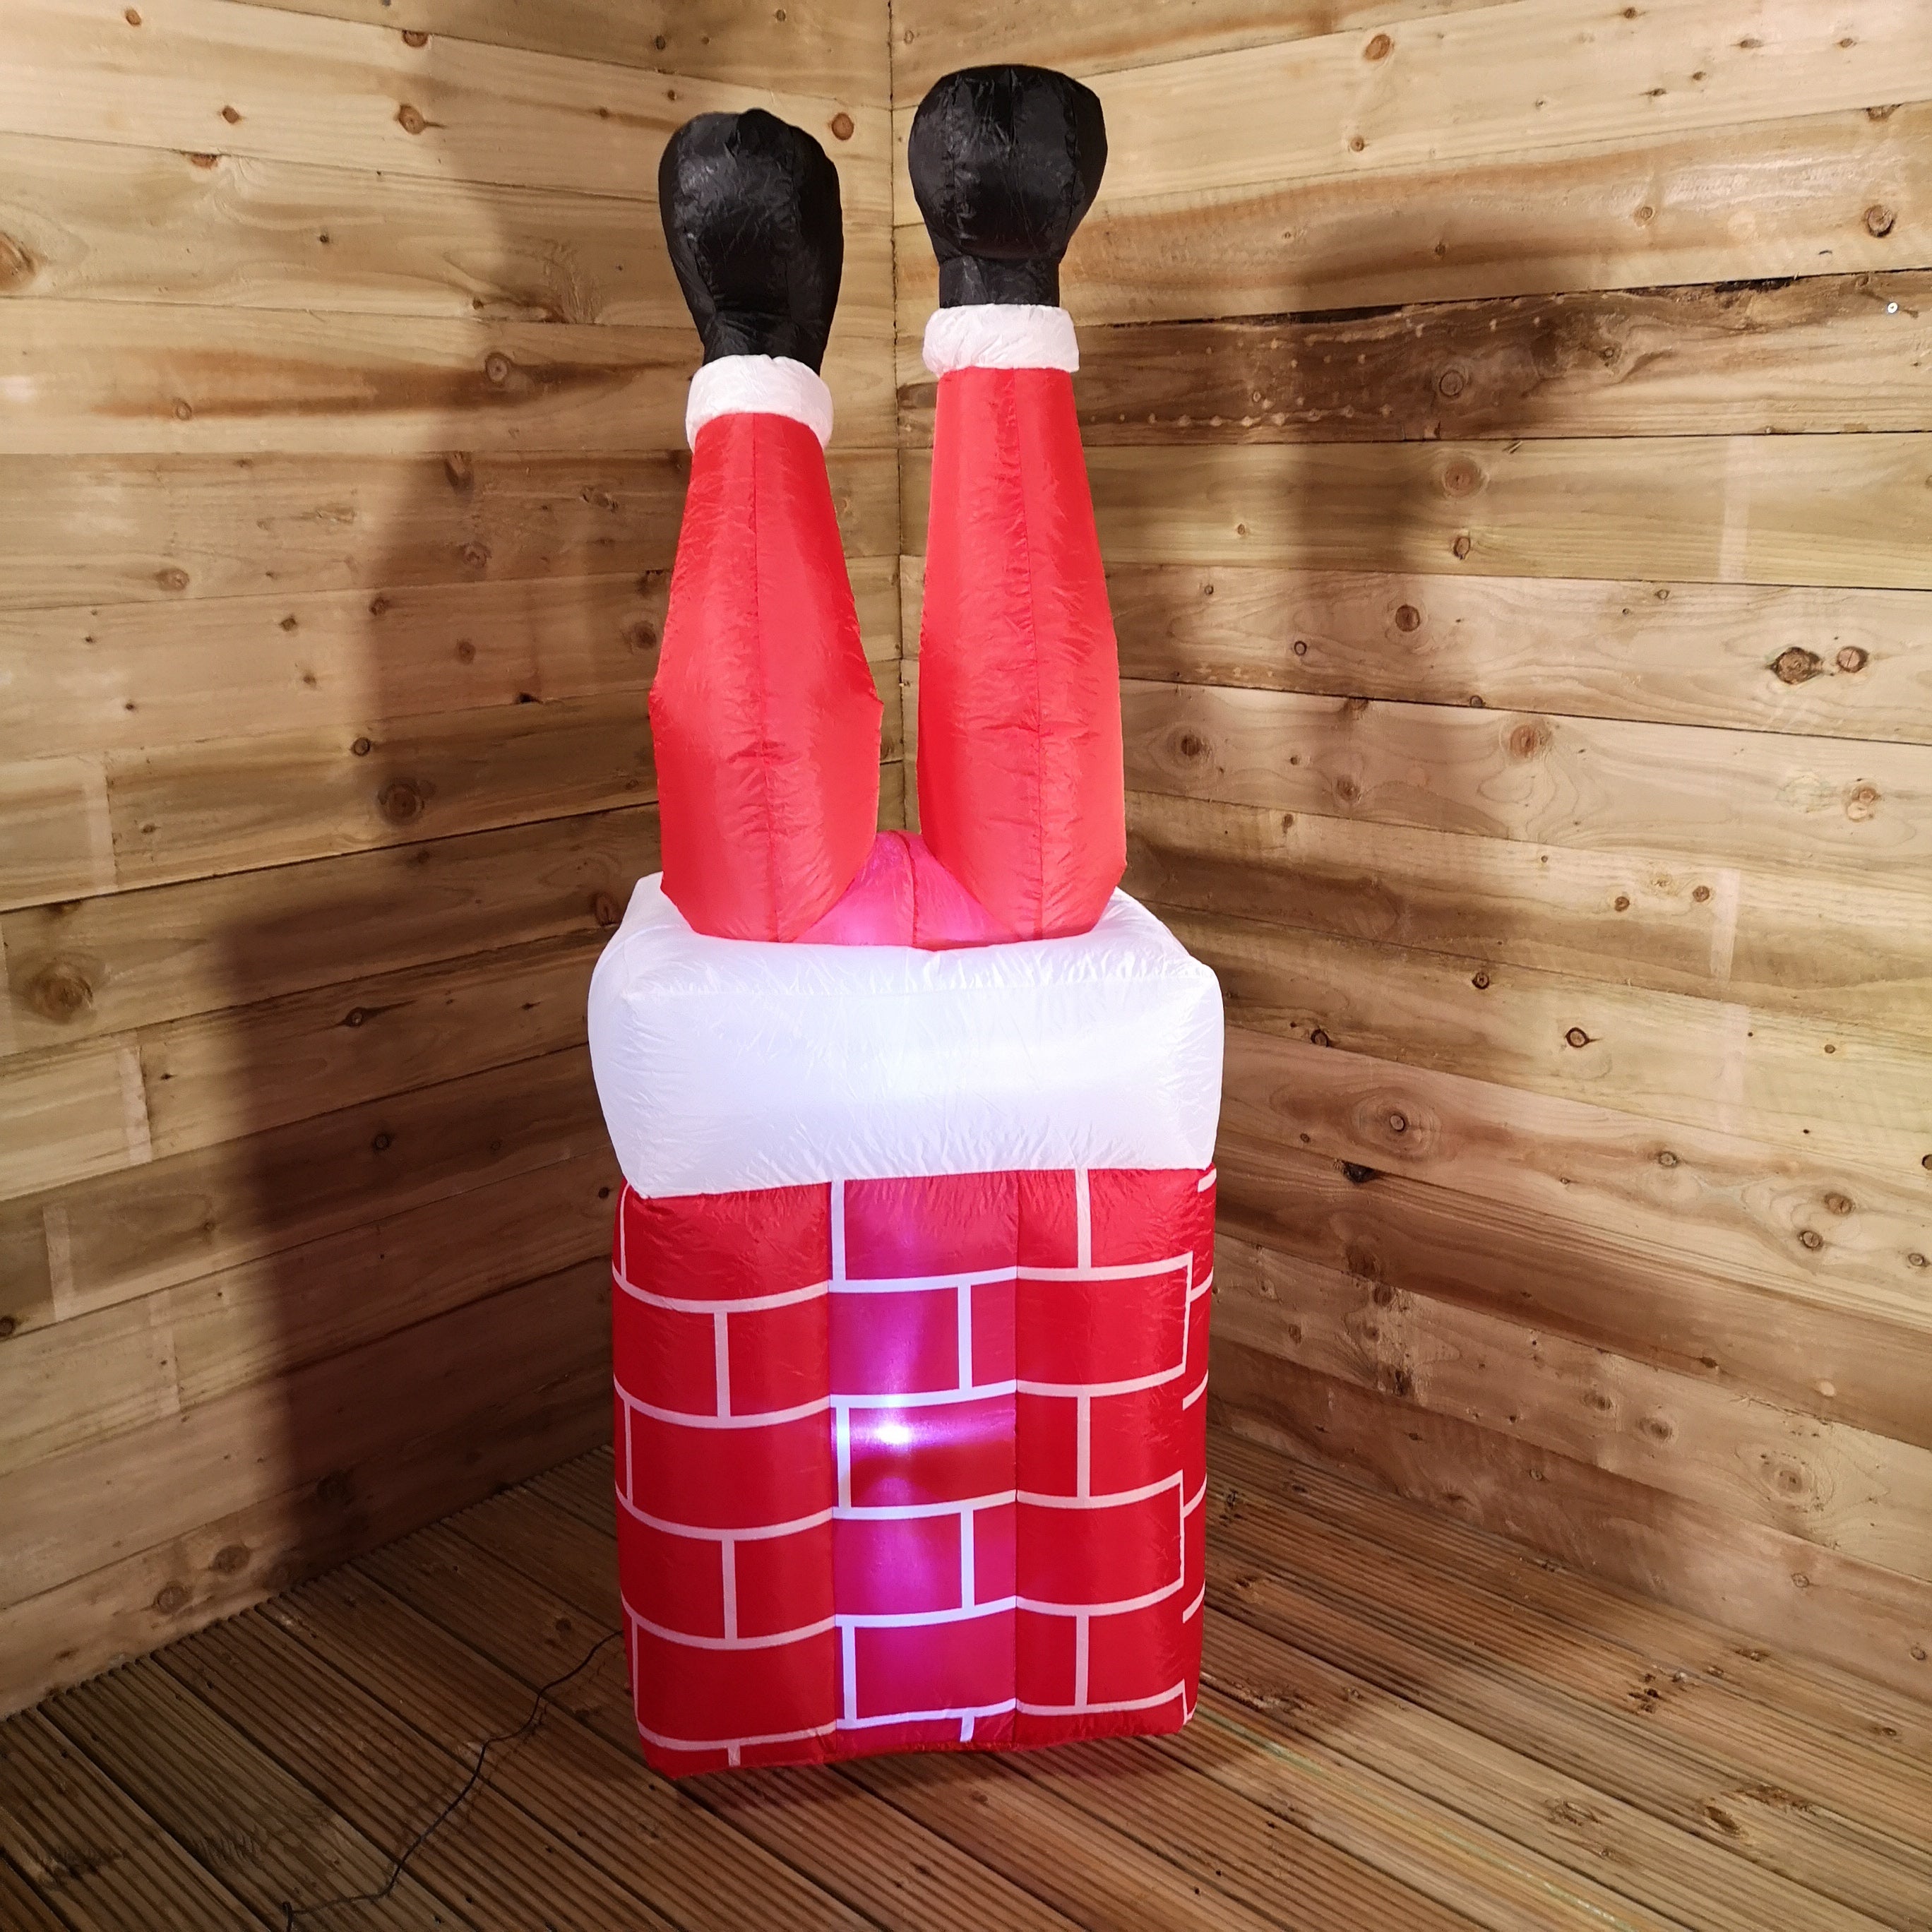 Premier 1.6M Outdoor Light Up Inflatable Christmas Santa Stuck in Chimney with Moving Legs